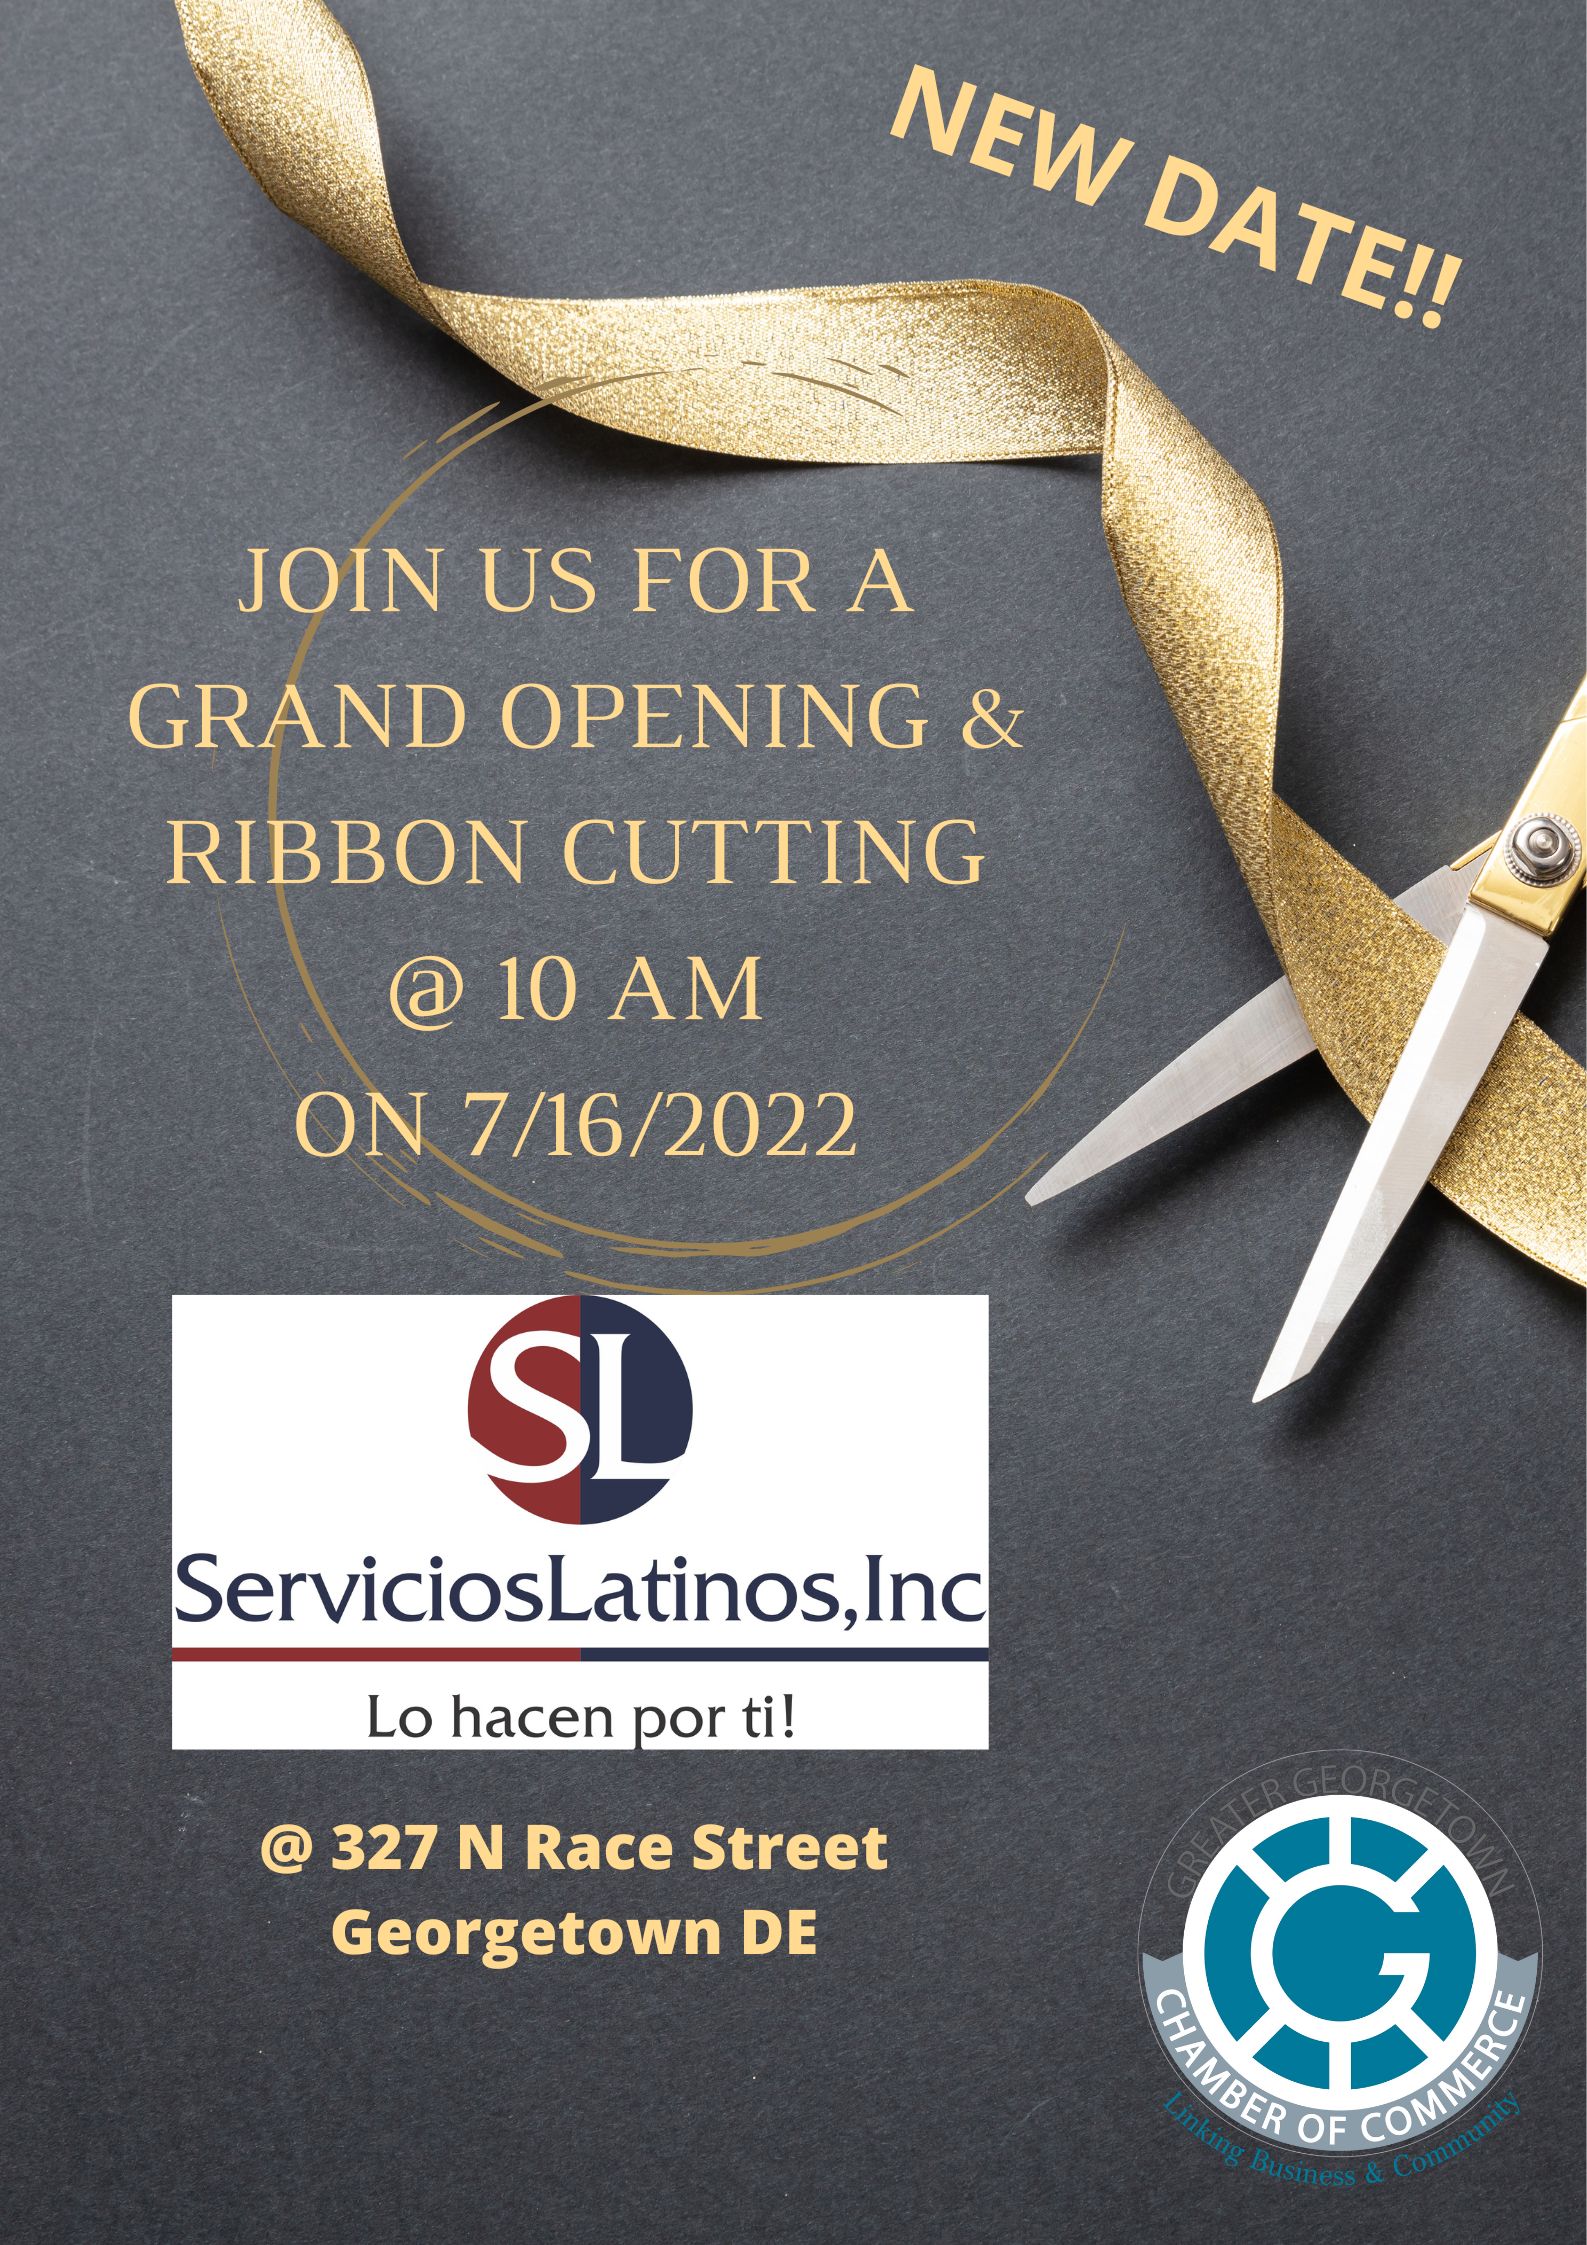 Join us for a Ribbon Cutting & Open House